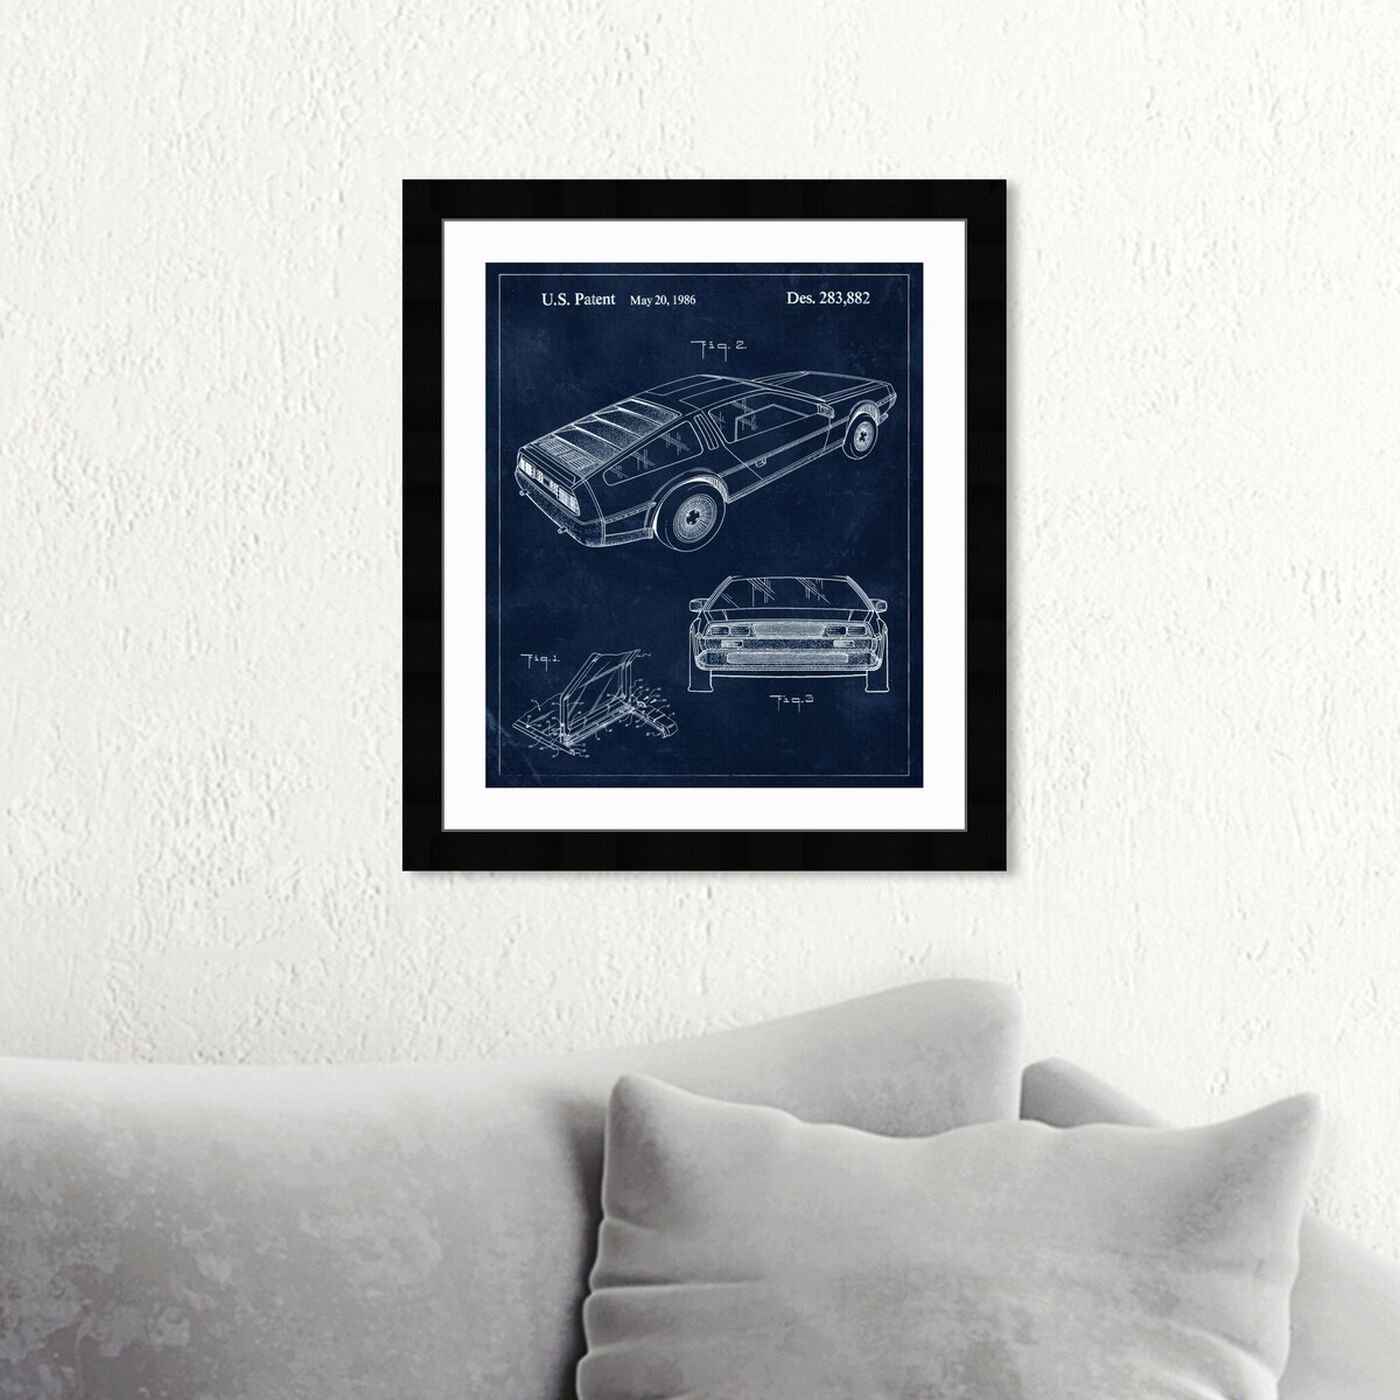 Hanging view of Delorean, 1986 II featuring transportation and automobiles art.